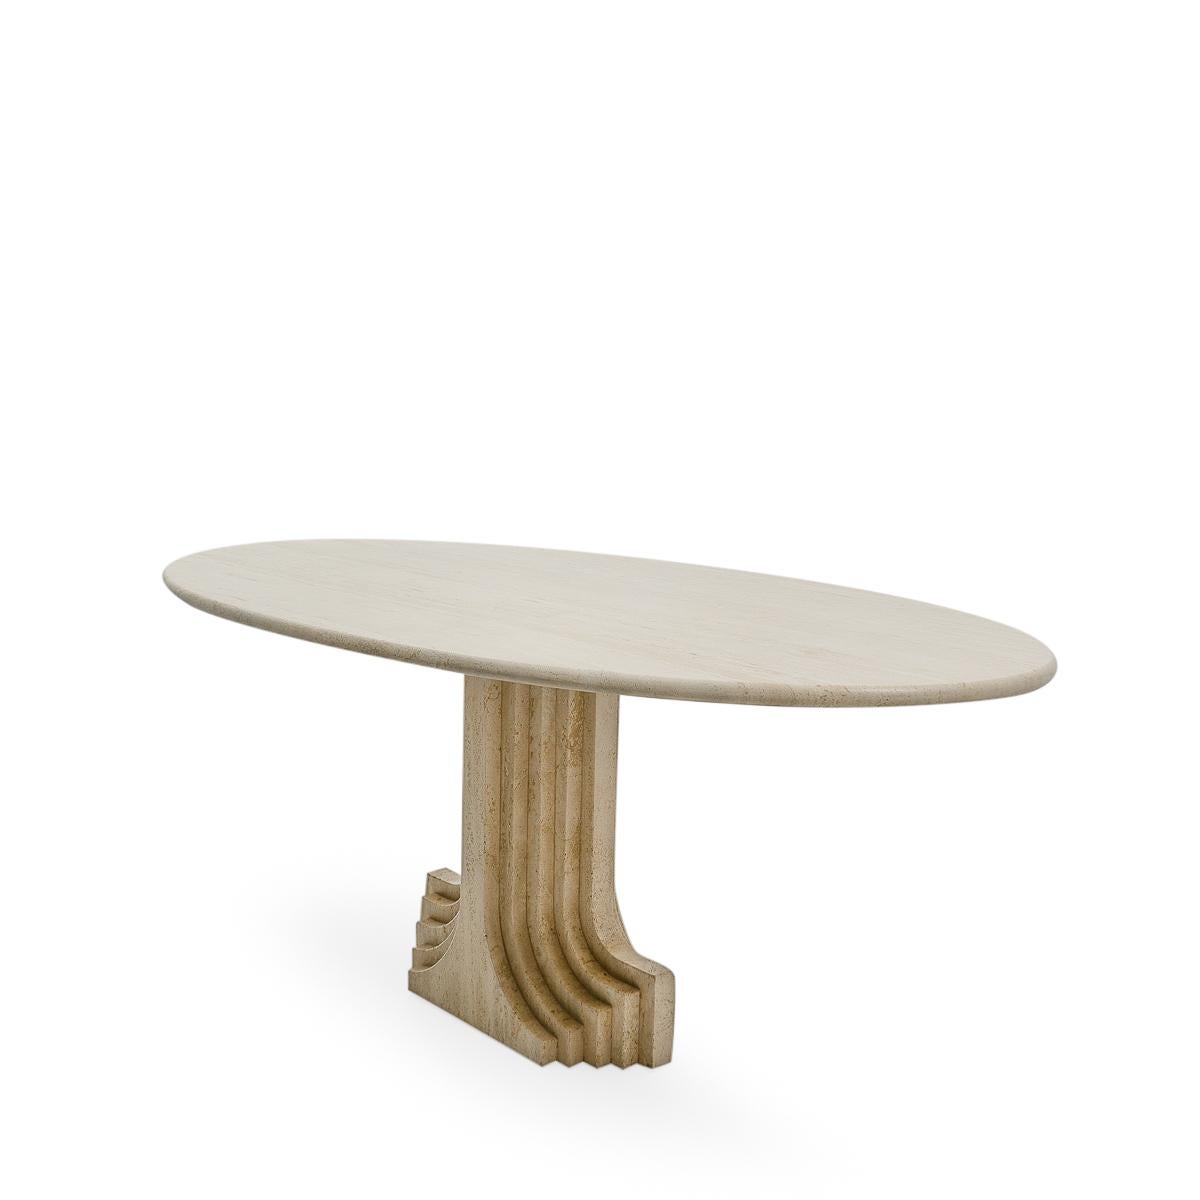 Oval travertine dining table by the Italian Architect Carlo Scarpa, designed during the 1970s.

With its sculptural pedestal base and polished travertine table top this piece is Scarpa’s modern take on Classic architecture. A striking centrepiece